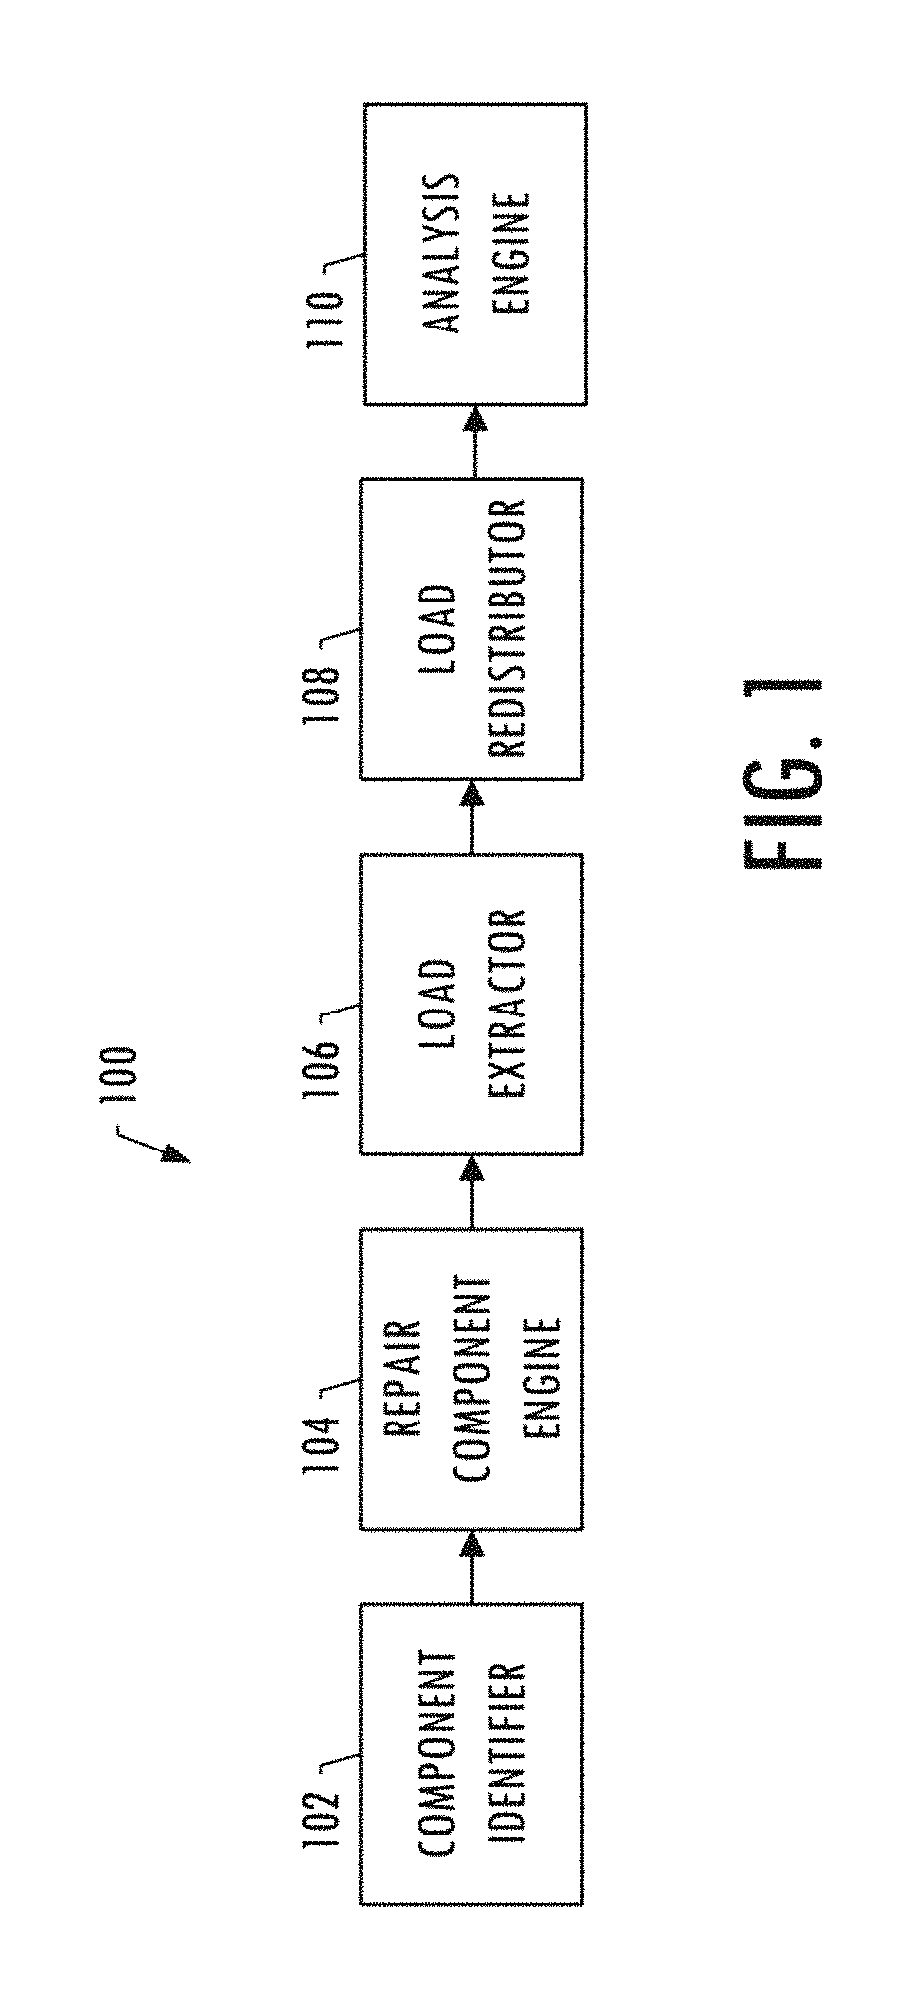 System for analysis of a repair for a structure